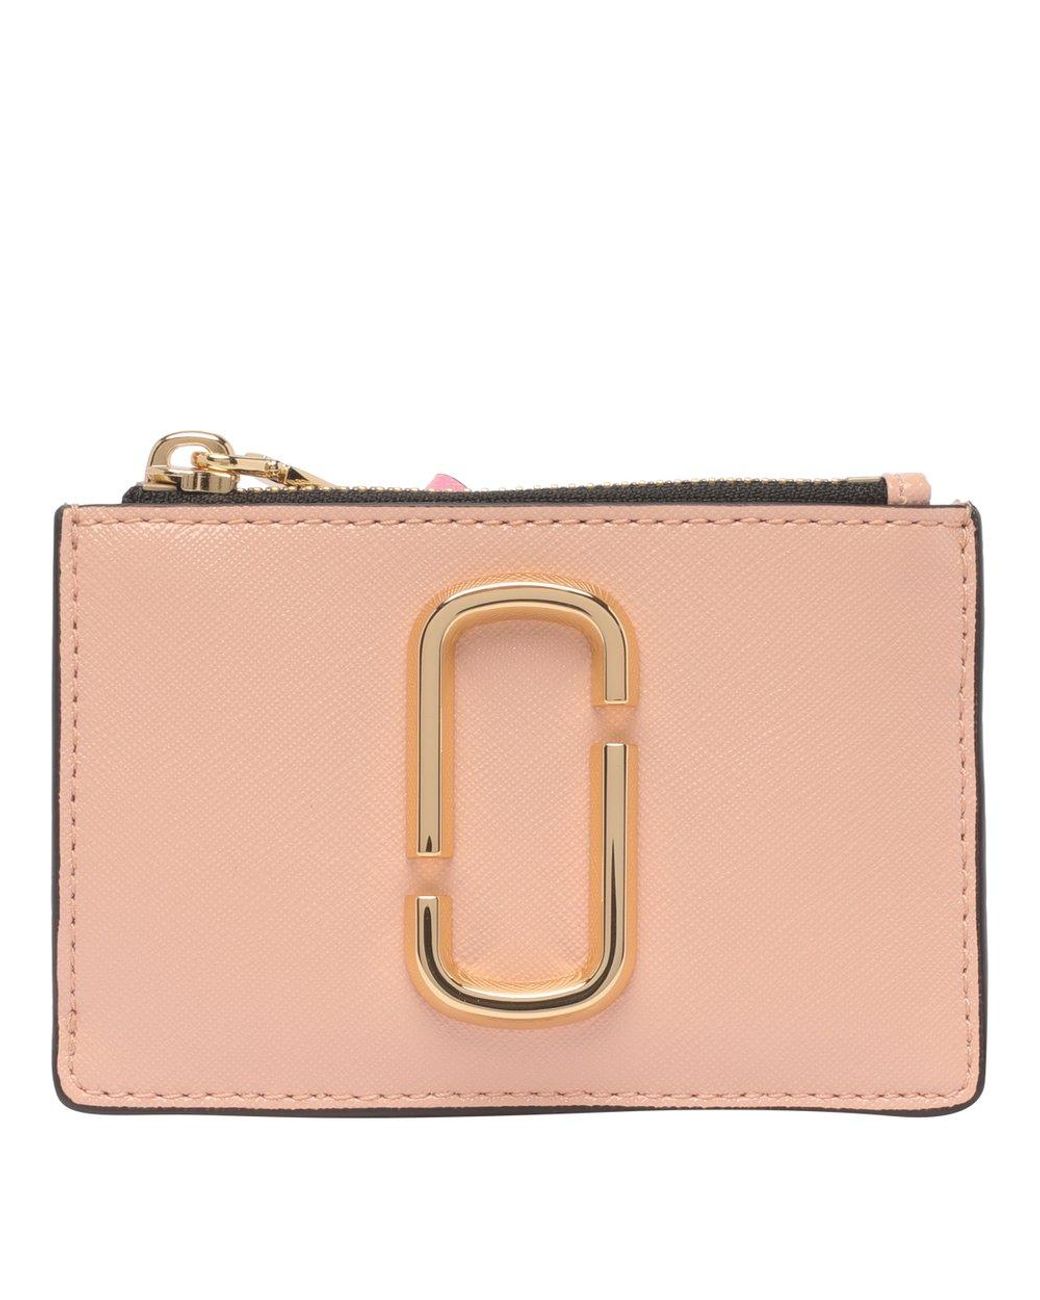 Marc Jacobs The Snapshot Top Zip Multi Wallet in Natural | Lyst Canada